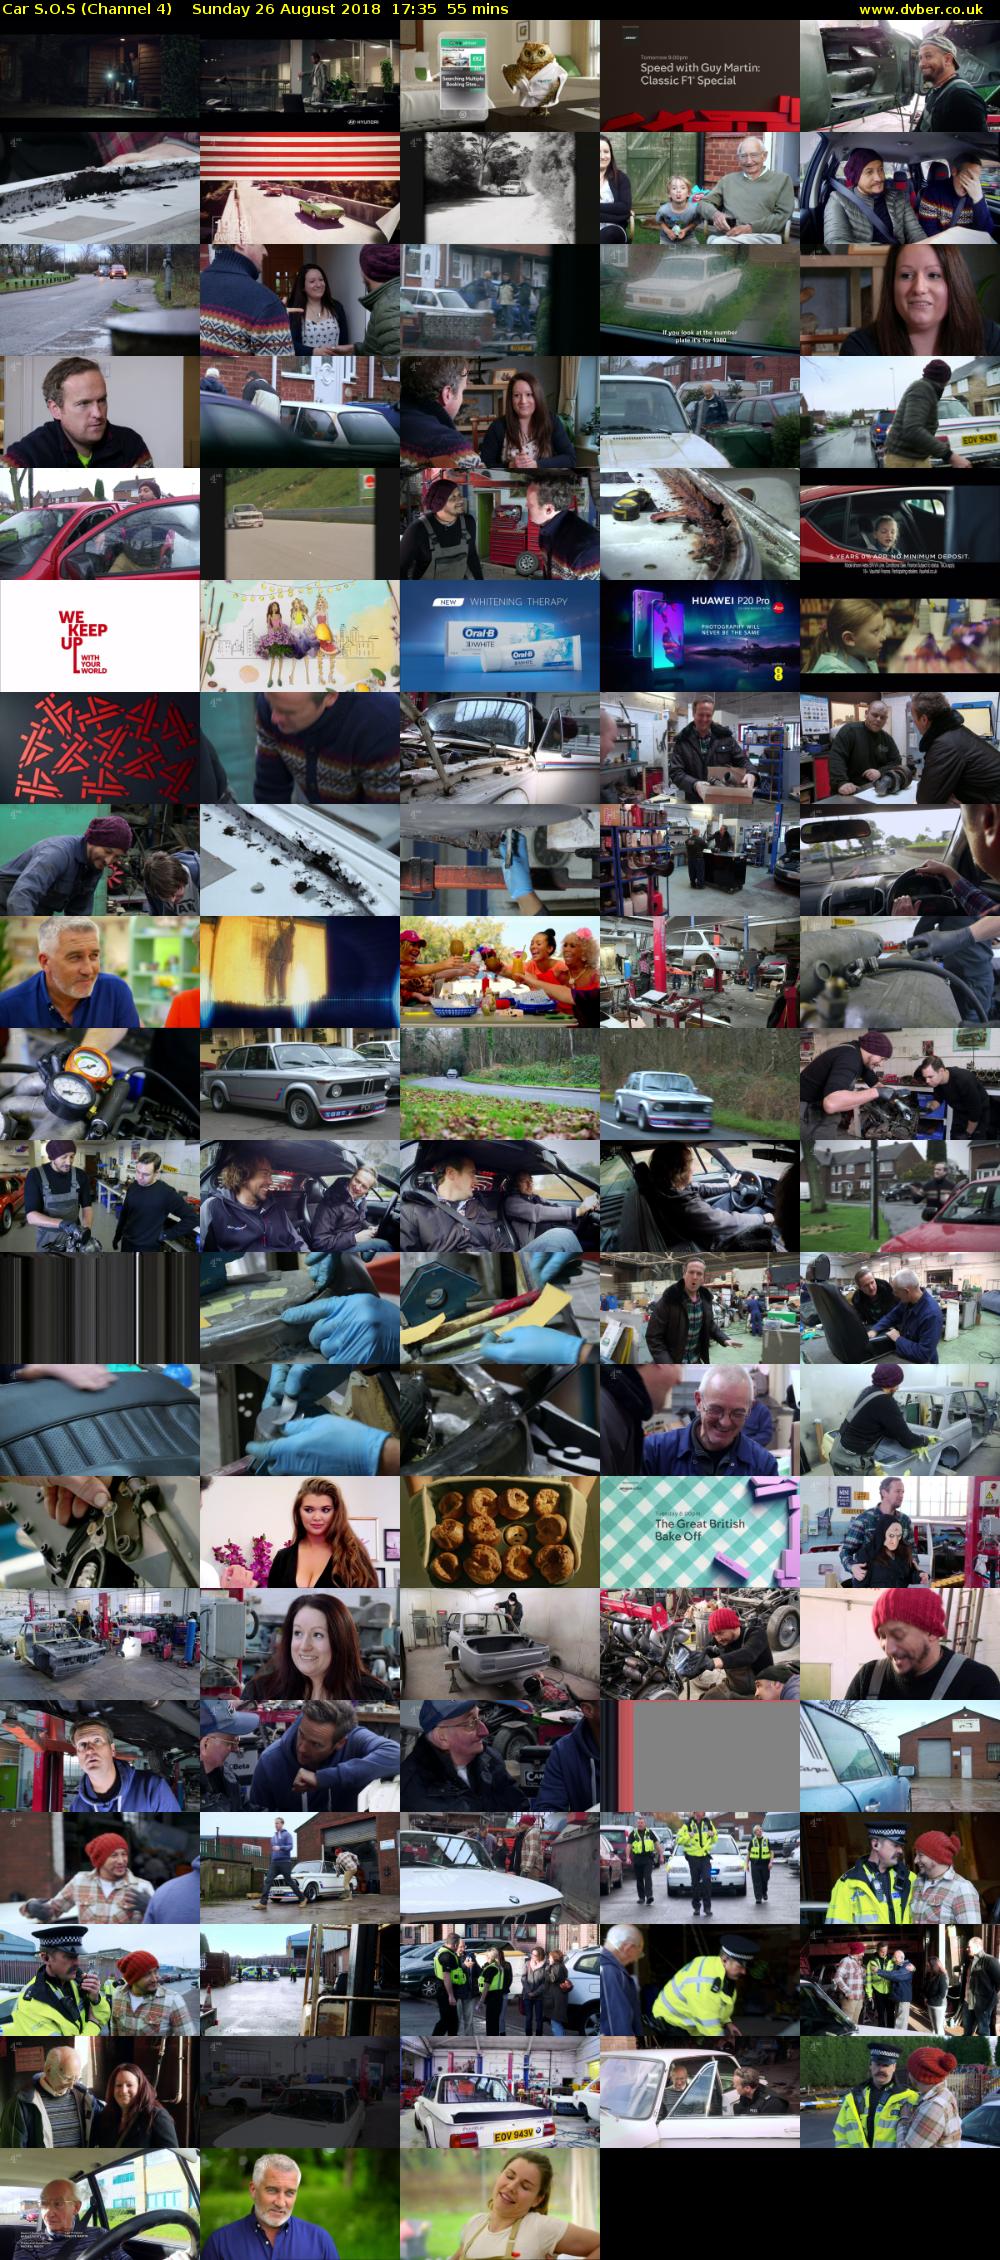 Car S.O.S (Channel 4) Sunday 26 August 2018 17:35 - 18:30